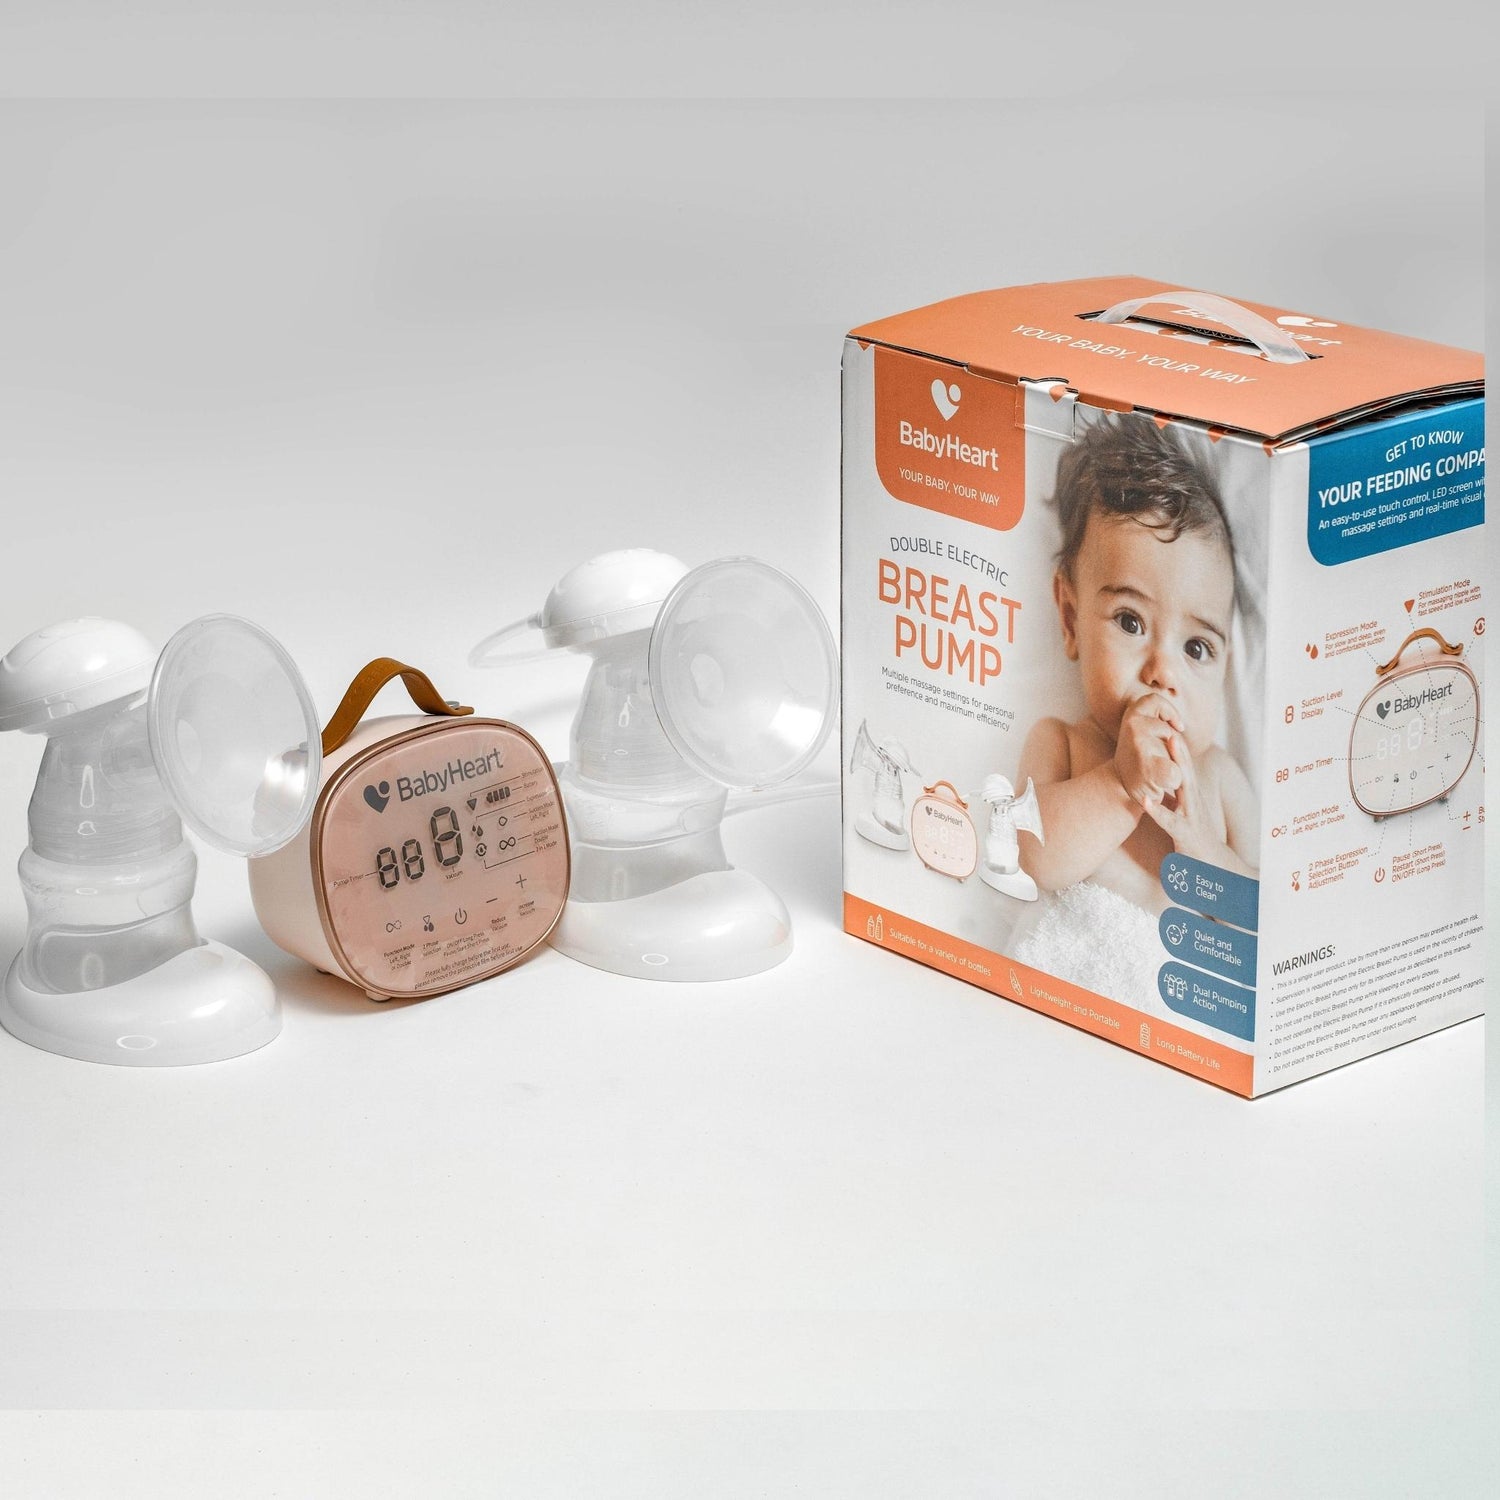 BabyHeart’s double electric breast pump and packaging